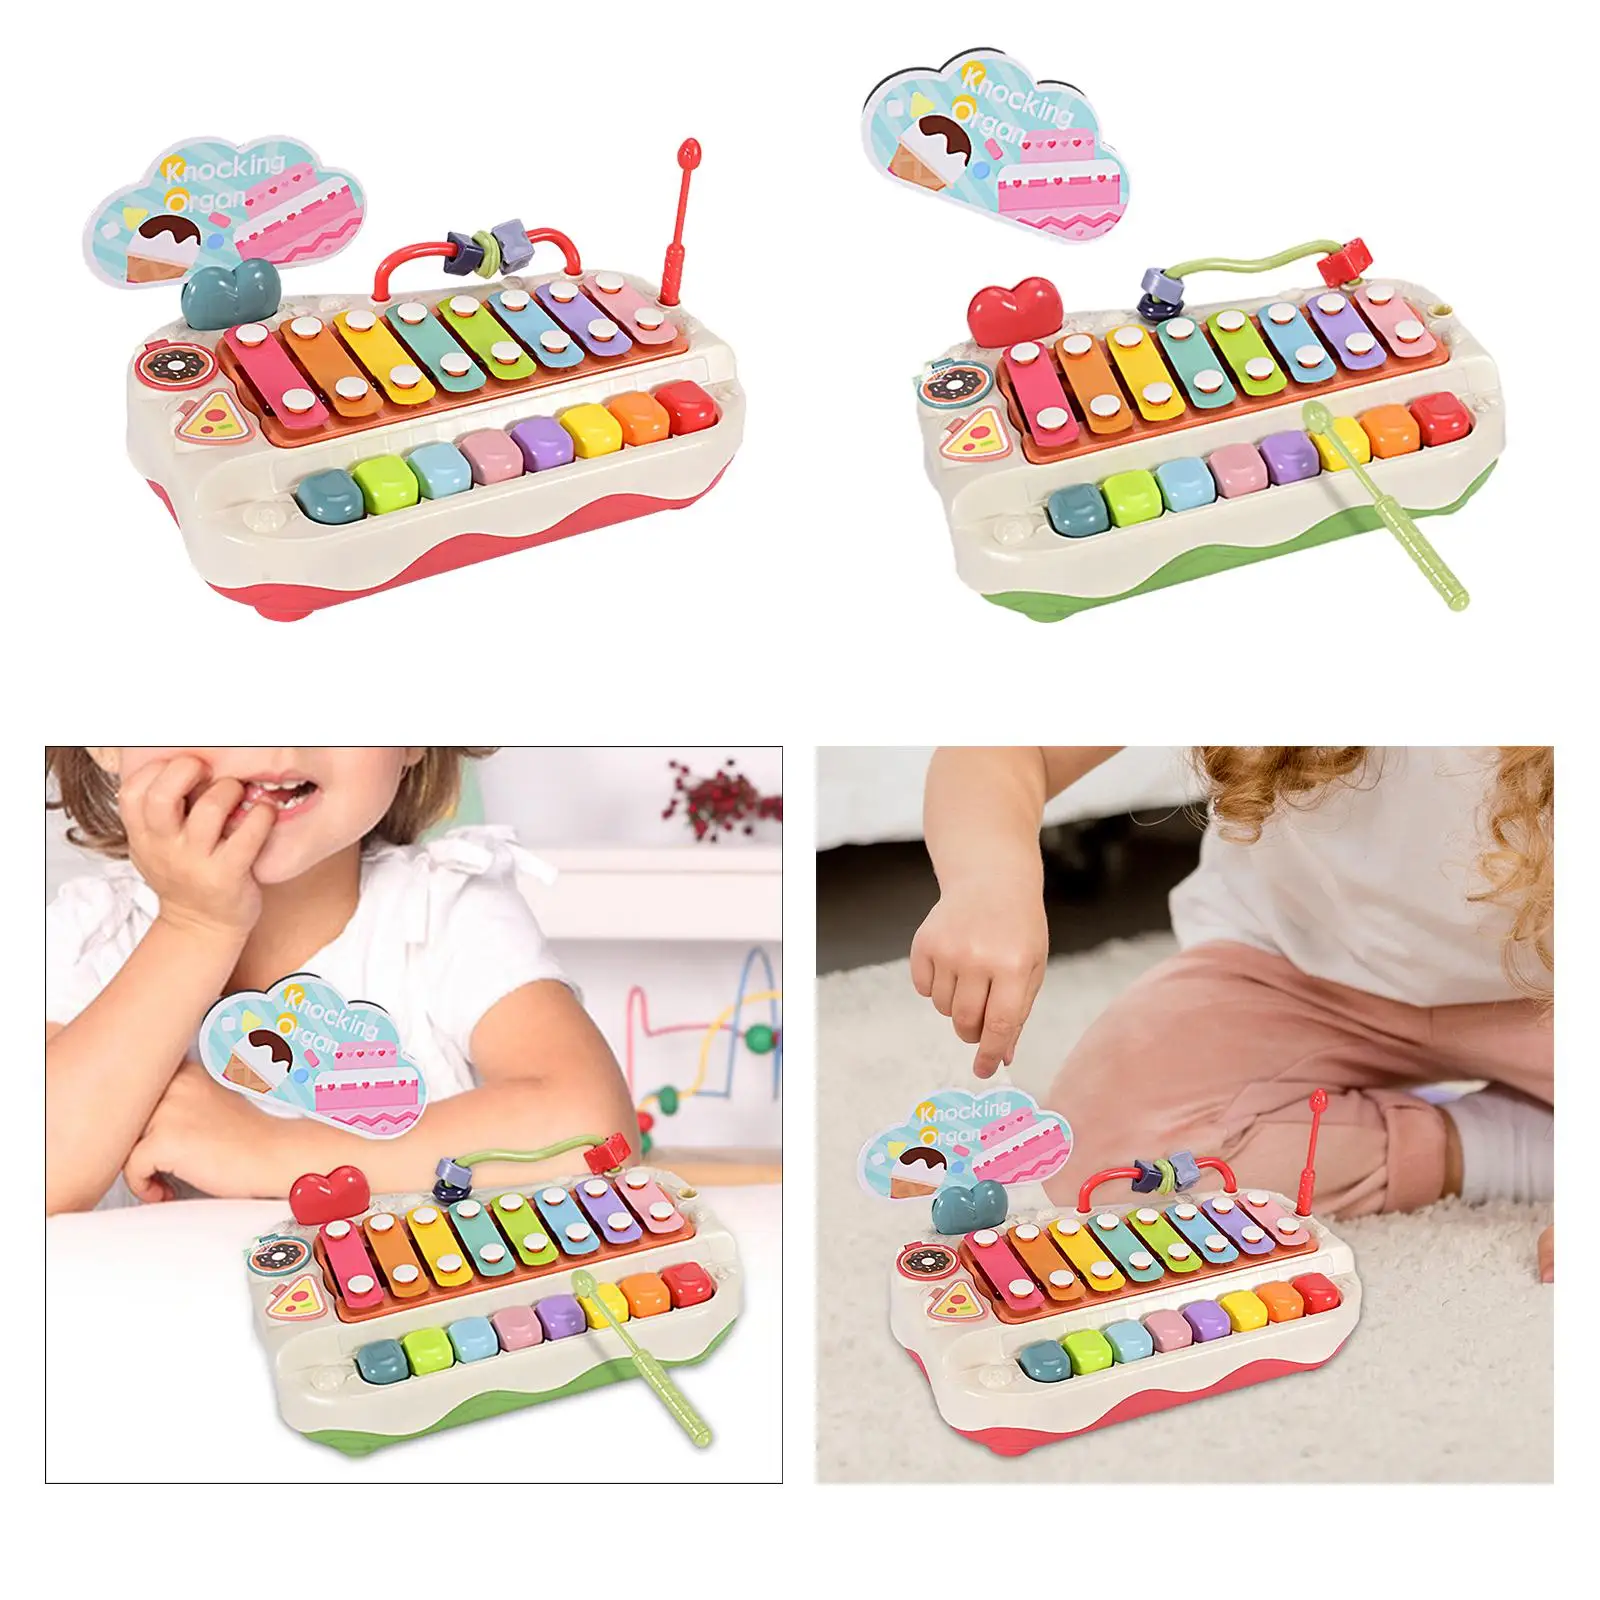 Musical Toy Learning Toy Multicolored Musical Instrument Toy Hand Knocking Piano Piano Toy for Boy Girls Toddler Kids 3+ Gifts